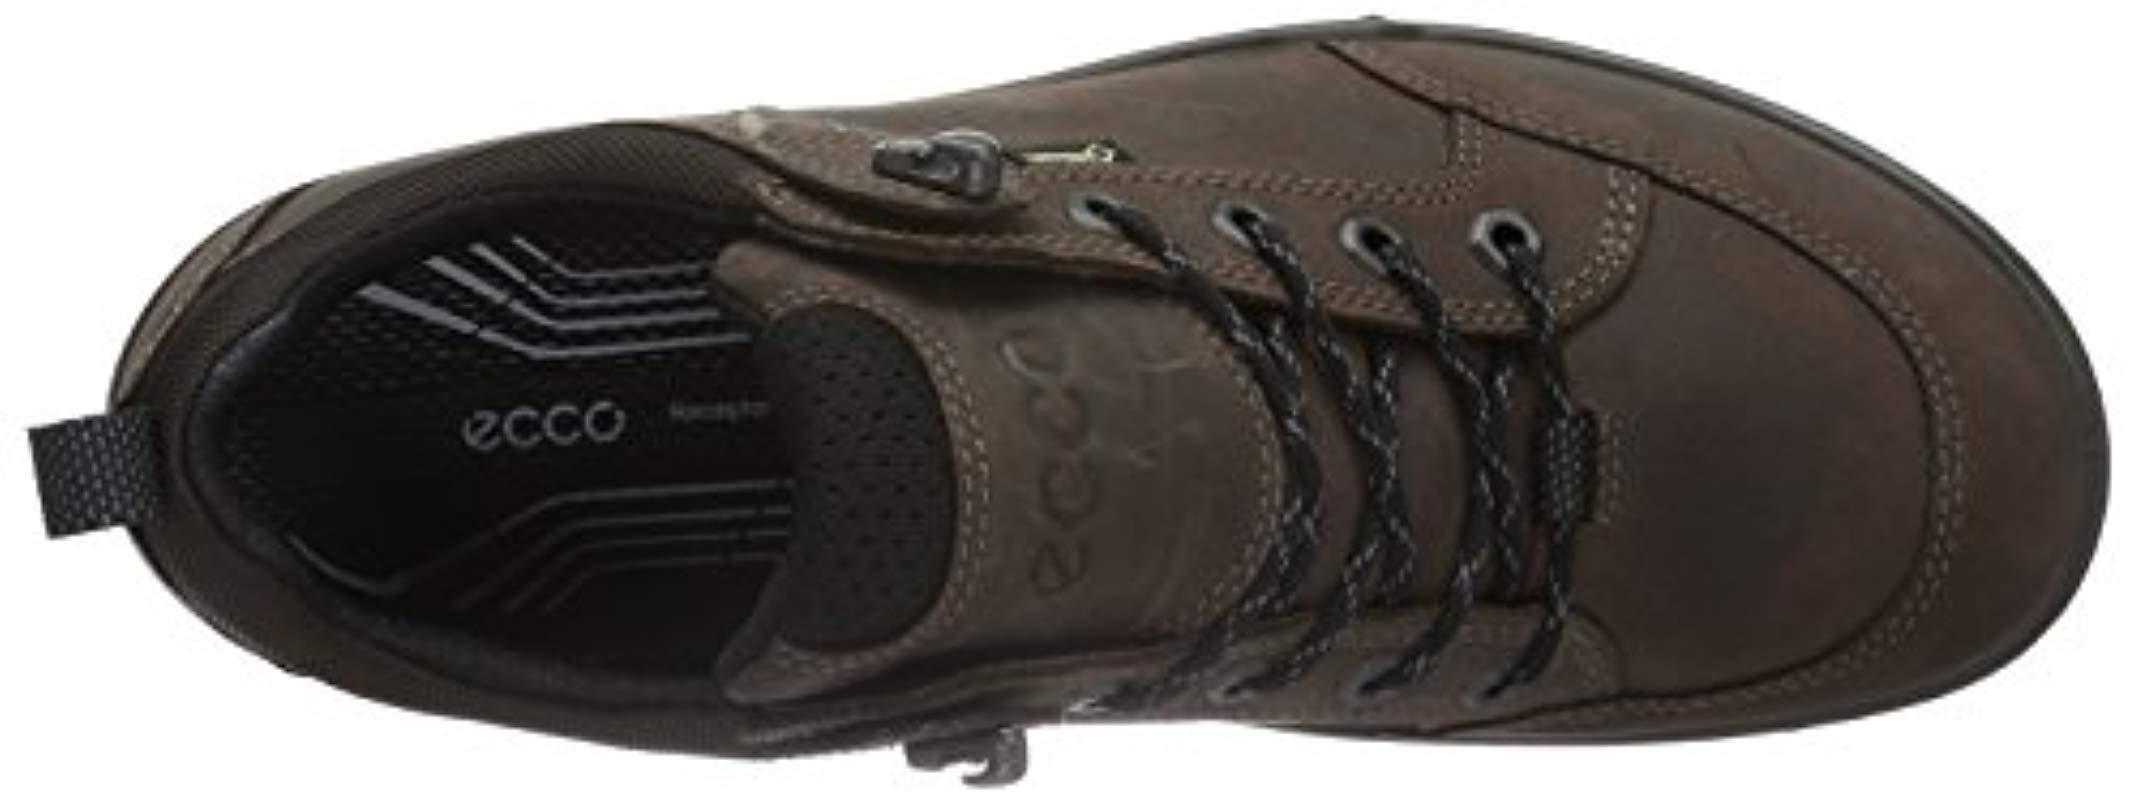 Ecco Leather Expedition Iii Low Gore-tex Hiking Boot Shoe in Black for Men  - Lyst